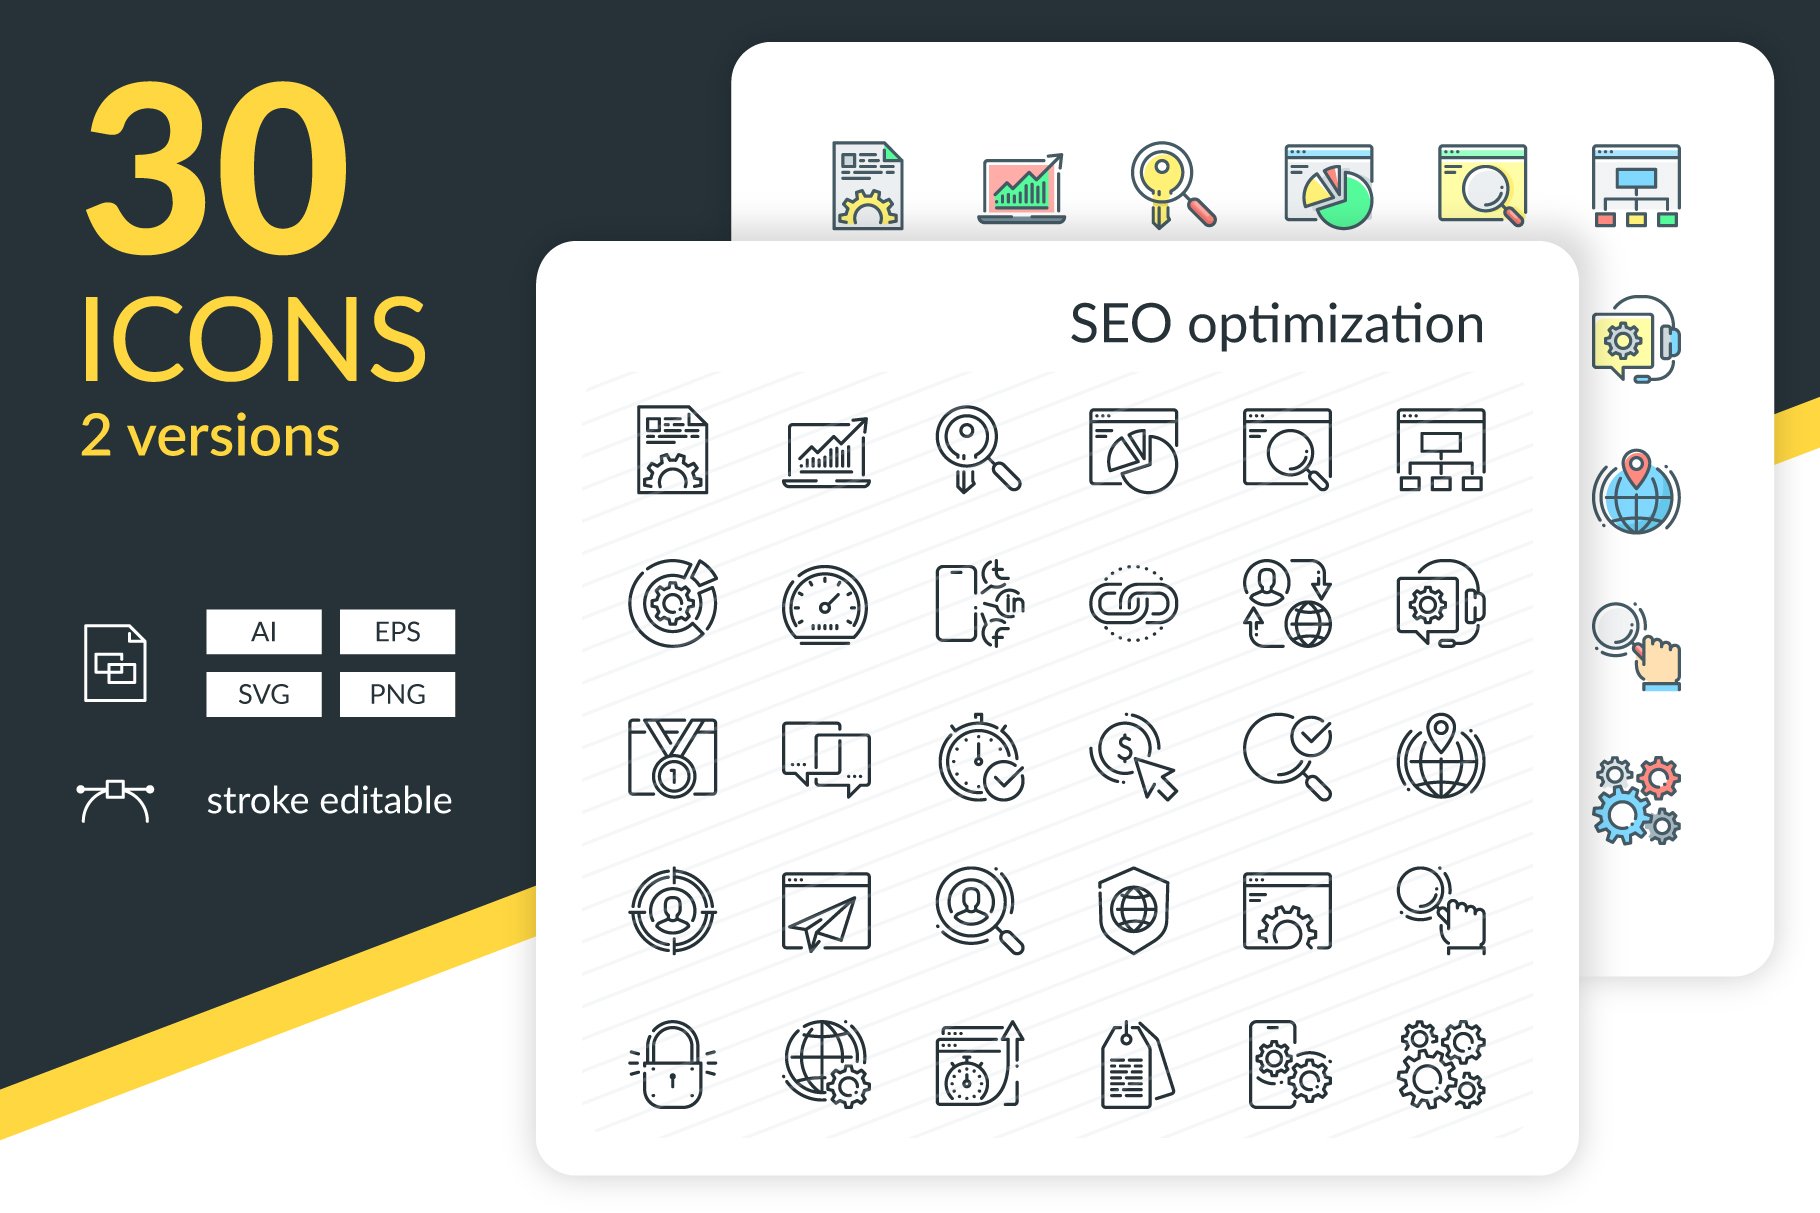 SEO Icons cover image.